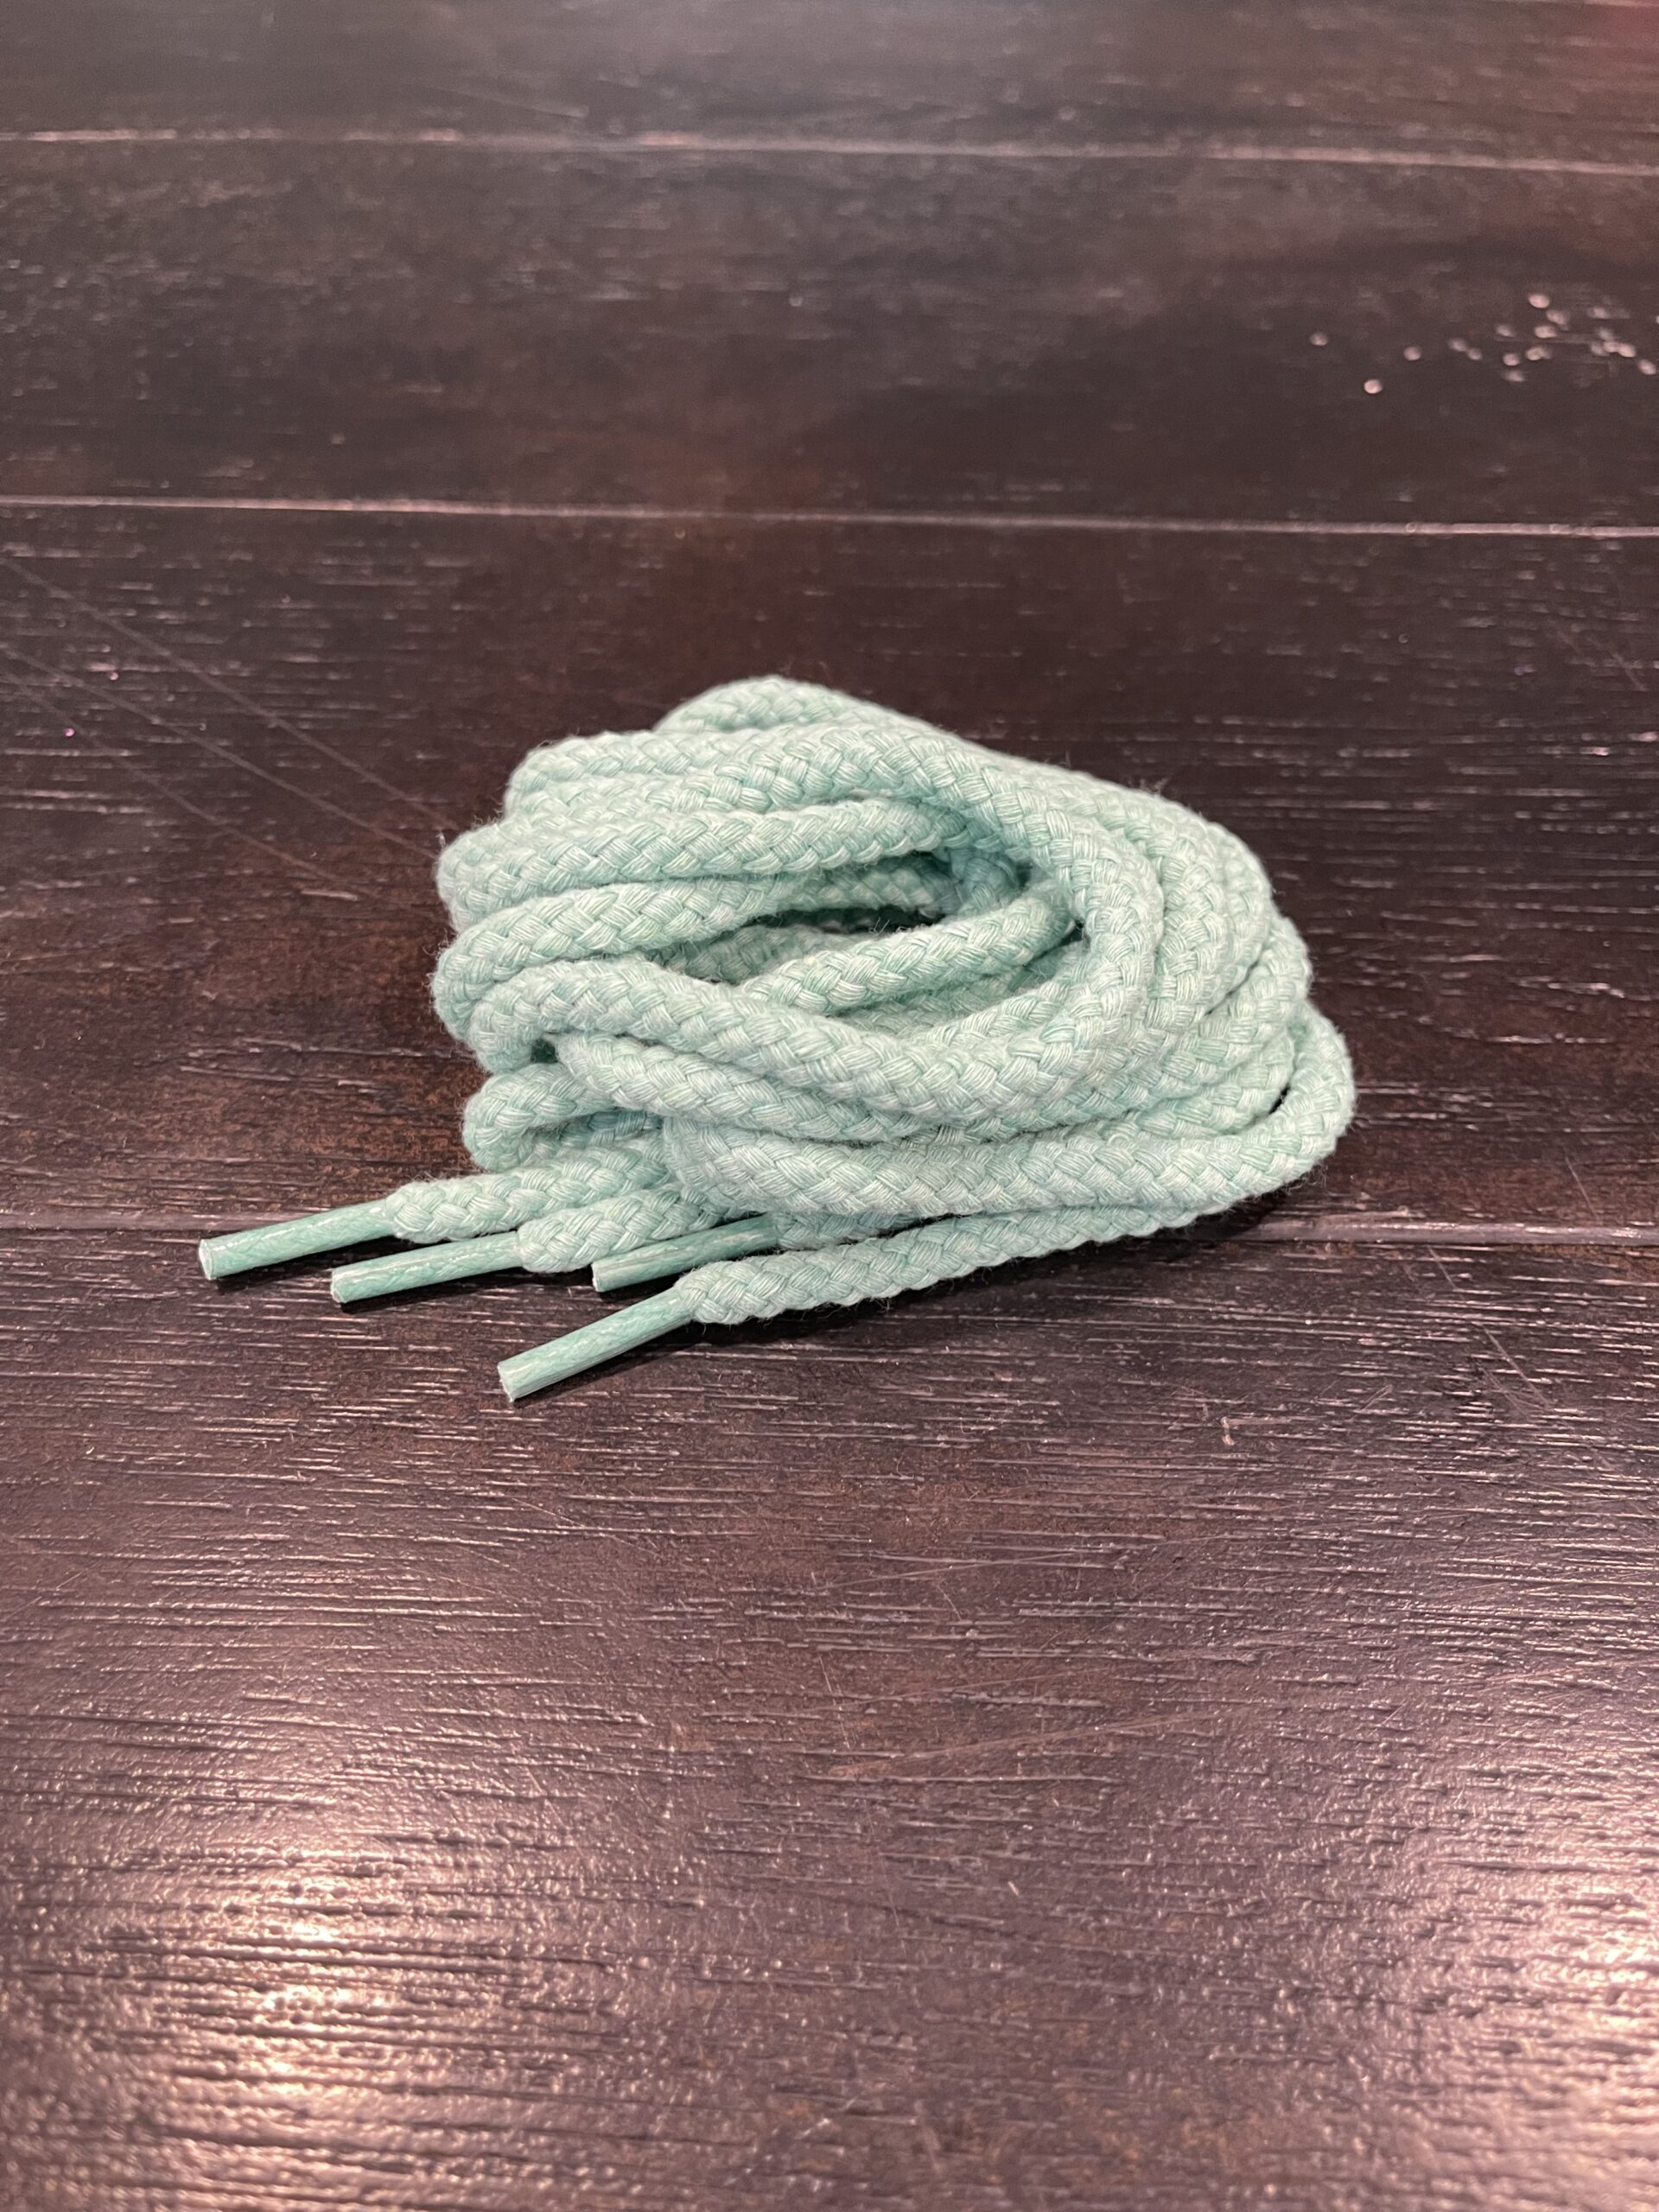 Flat Replacement Laces - Jordan 1 High & More! – FEELGOOD THREADS